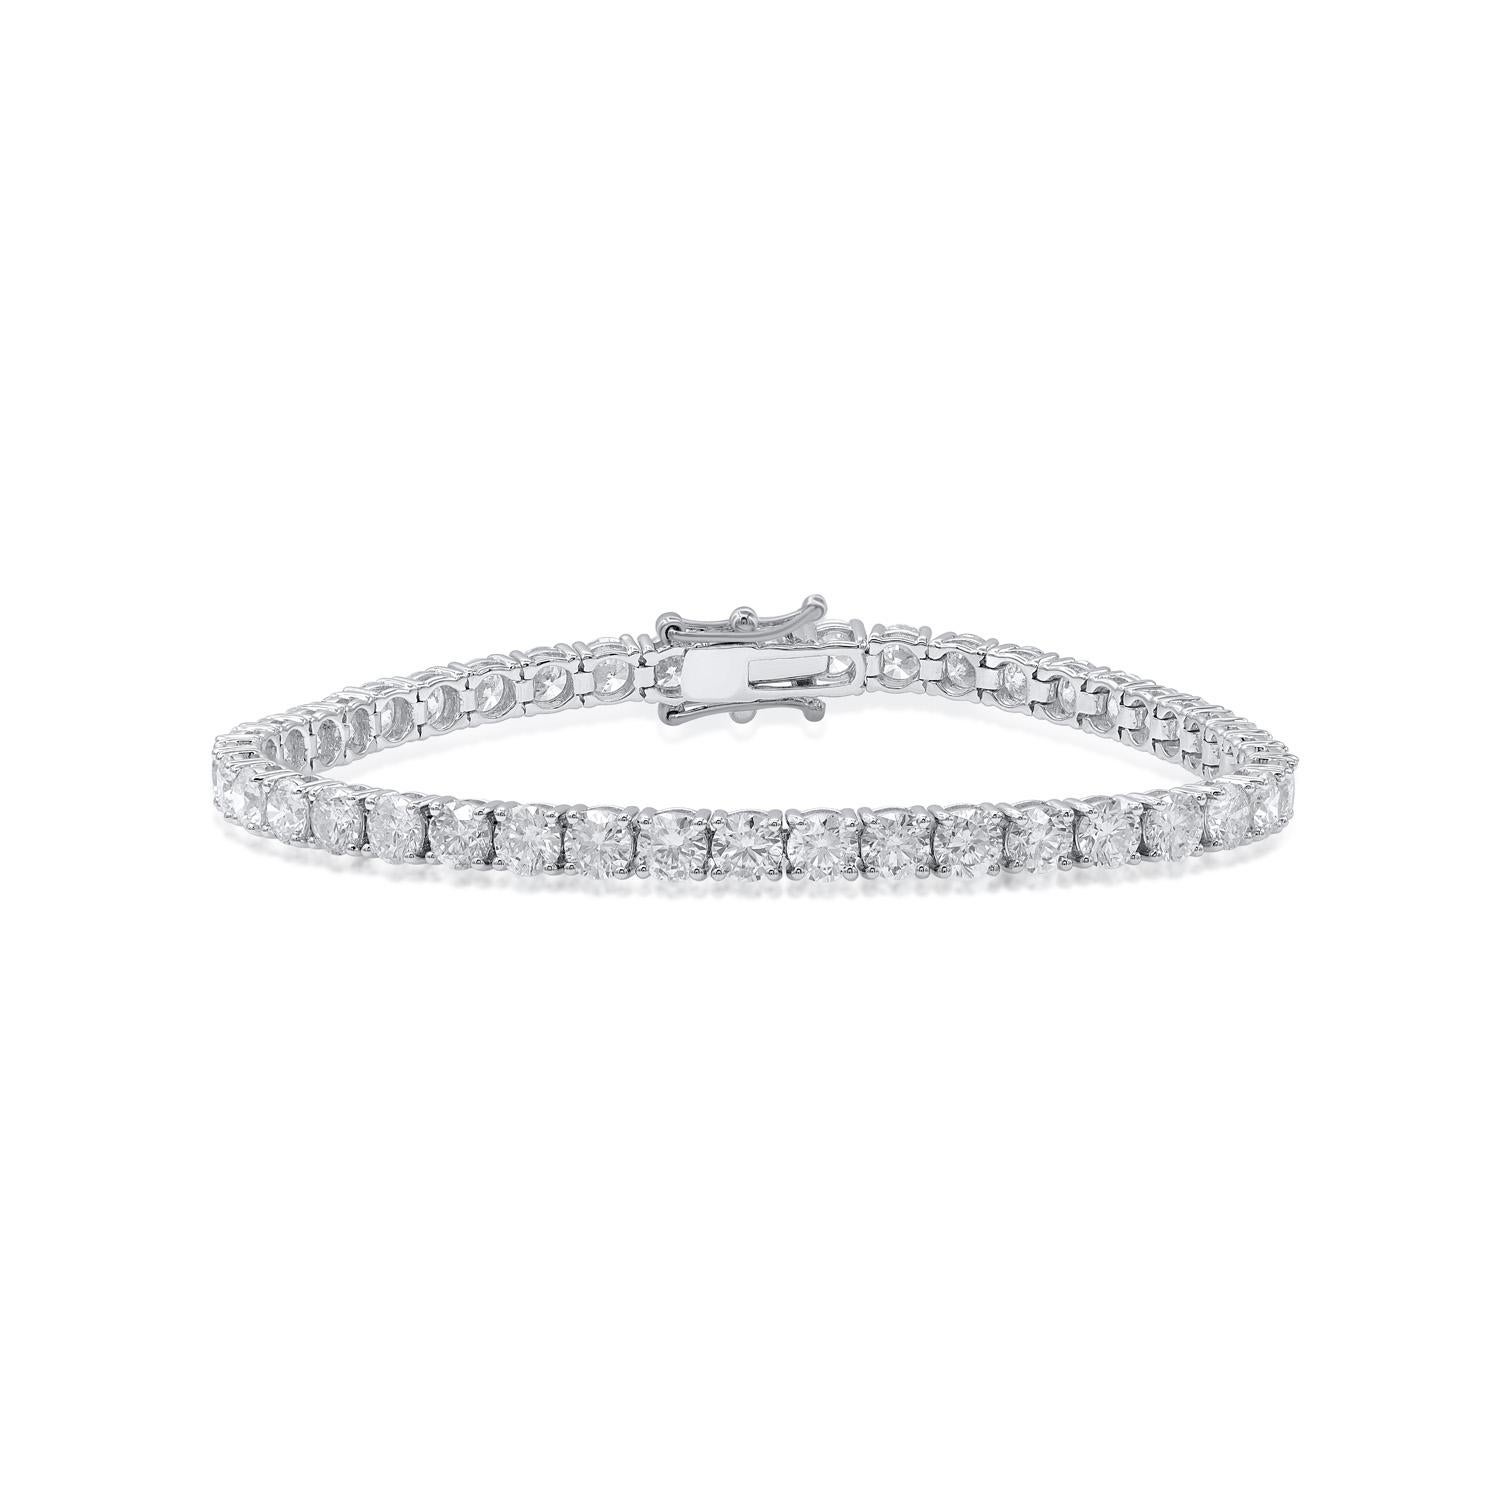 Crafted in 18 KT white gold, this bracelet shines brightly with 43 round-cut diamonds set in prong, diamond details H-I Color, I1-I2 Clarity.  This classic bracelet with match perfectly with all your styles. 